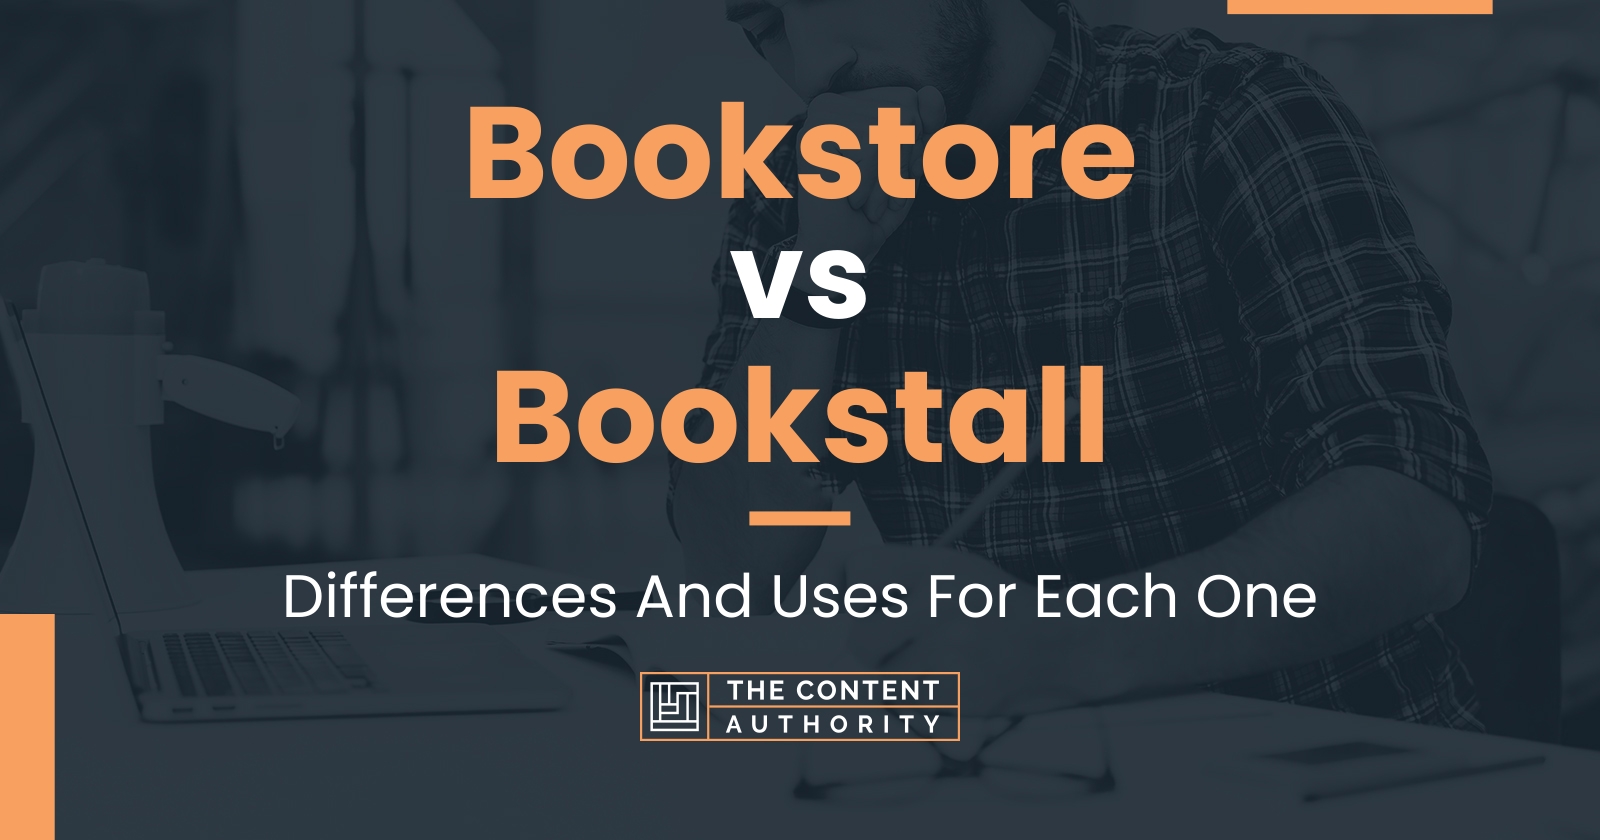 Bookstore vs Bookstall: Differences And Uses For Each One